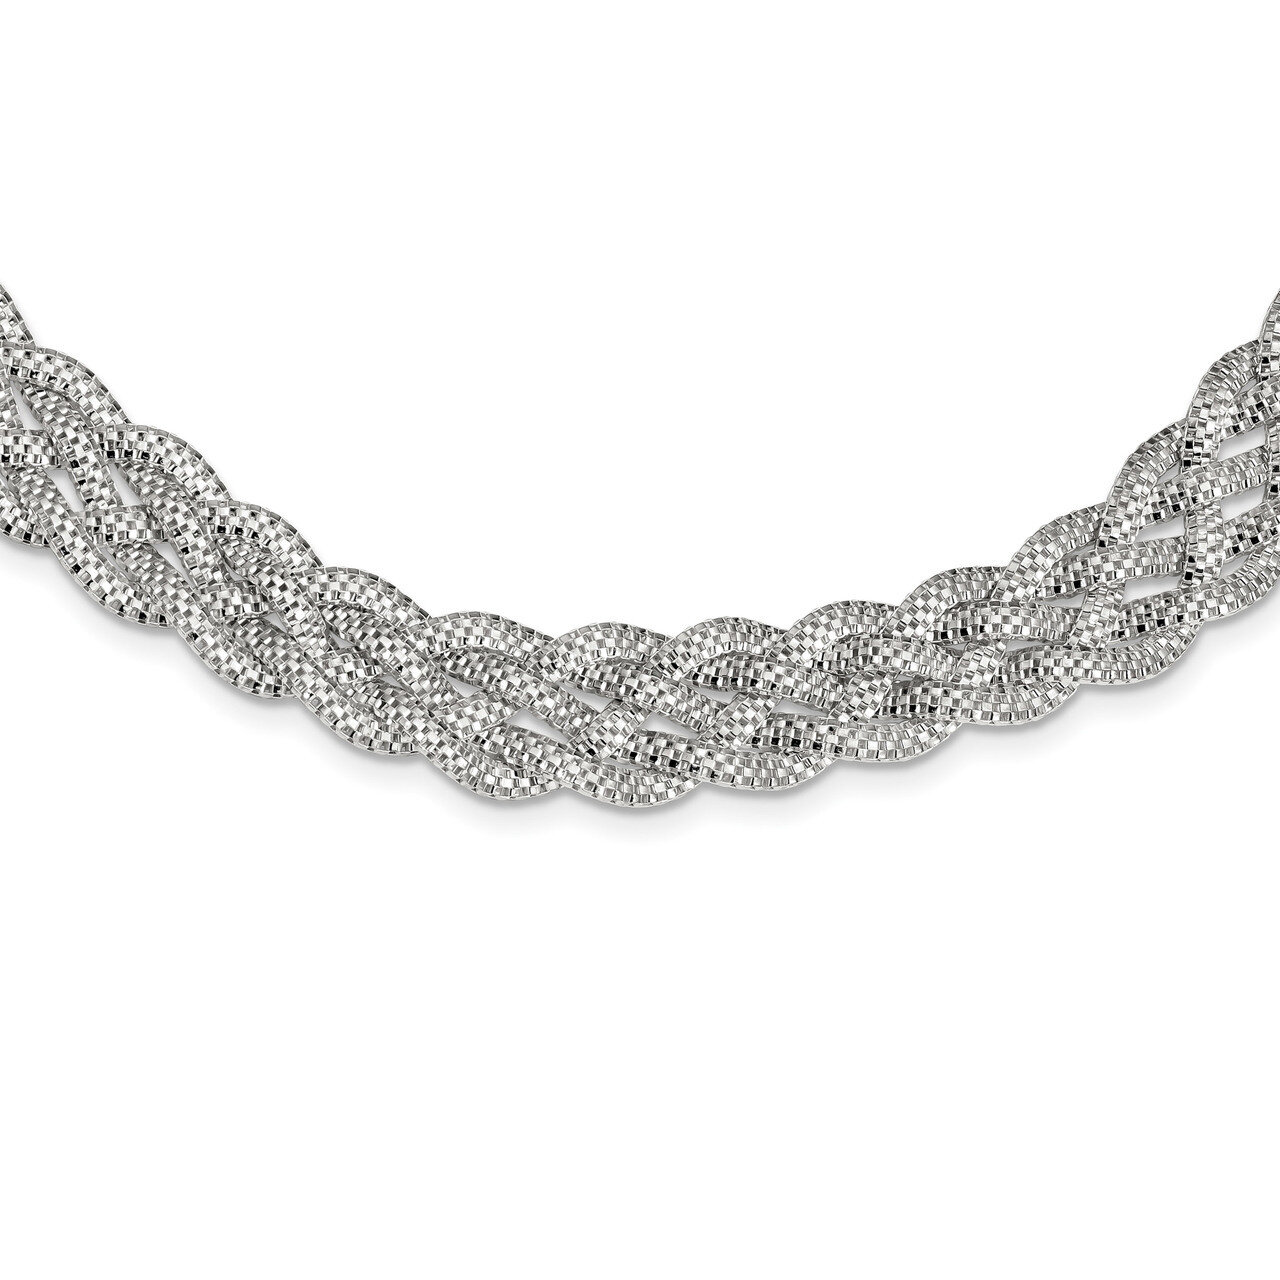 Braided Mesh Necklace 18 Inch Sterling Silver QG3841-18